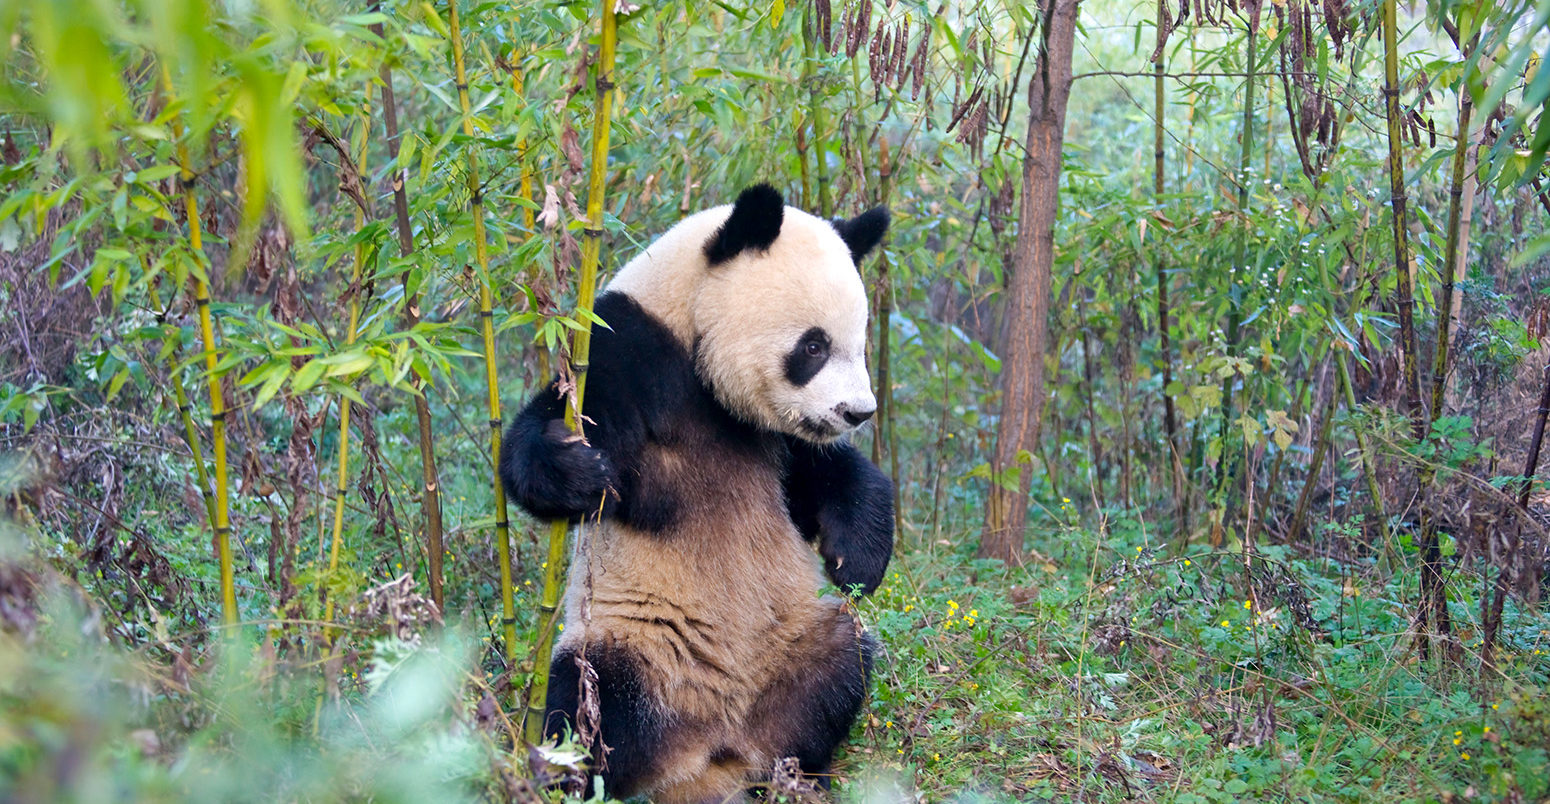 What is the biggest threat to giant pandas?